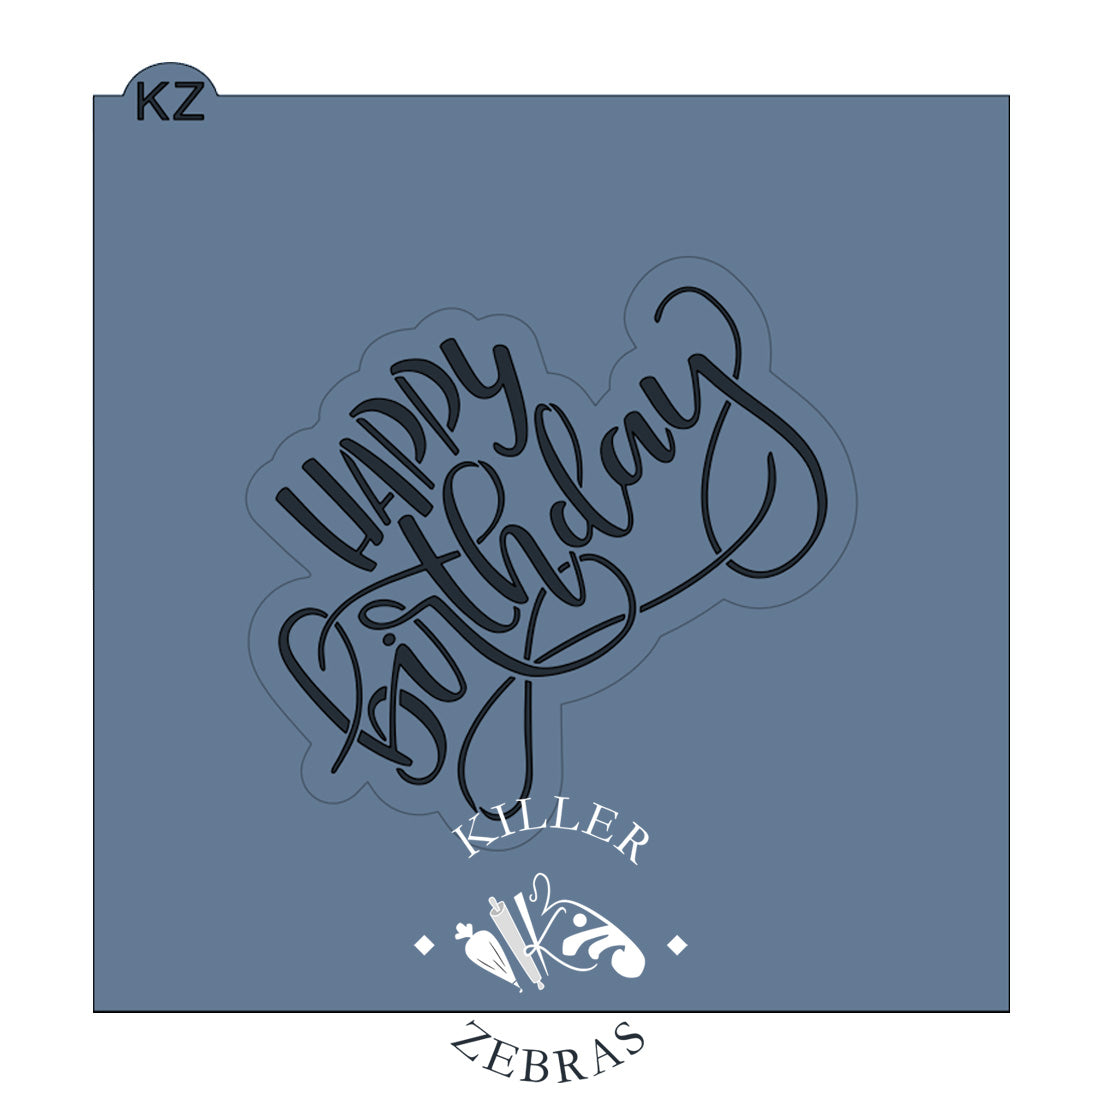 Happy Birthday Hand Lettered (Style 1)